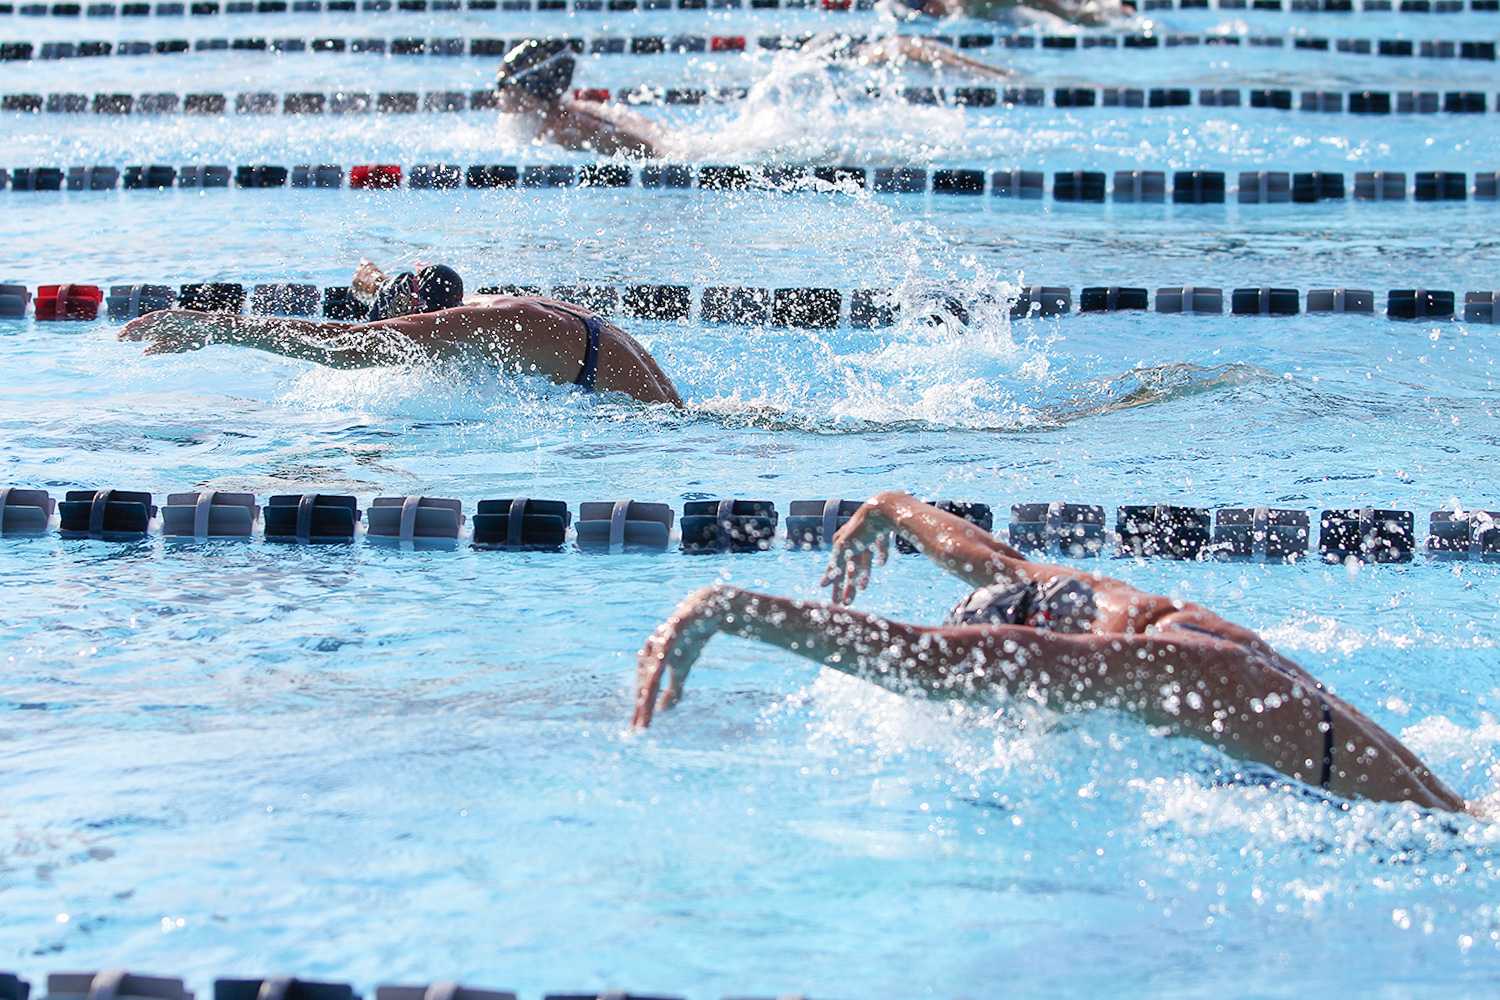 Swimmers from FAU and FIU compete during the men’s butterfly stroke leg.